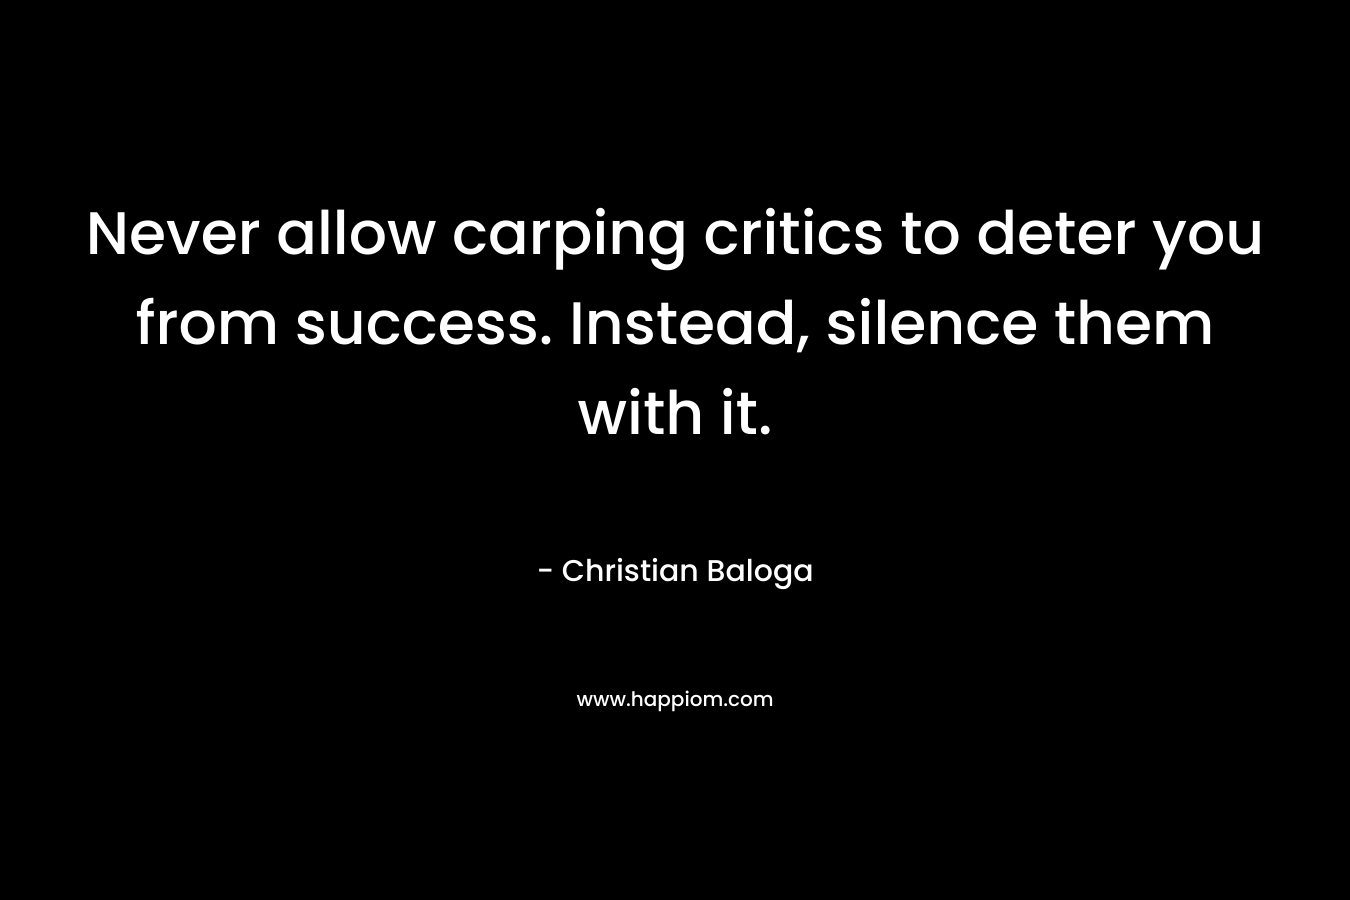 Never allow carping critics to deter you from success. Instead, silence them with it.